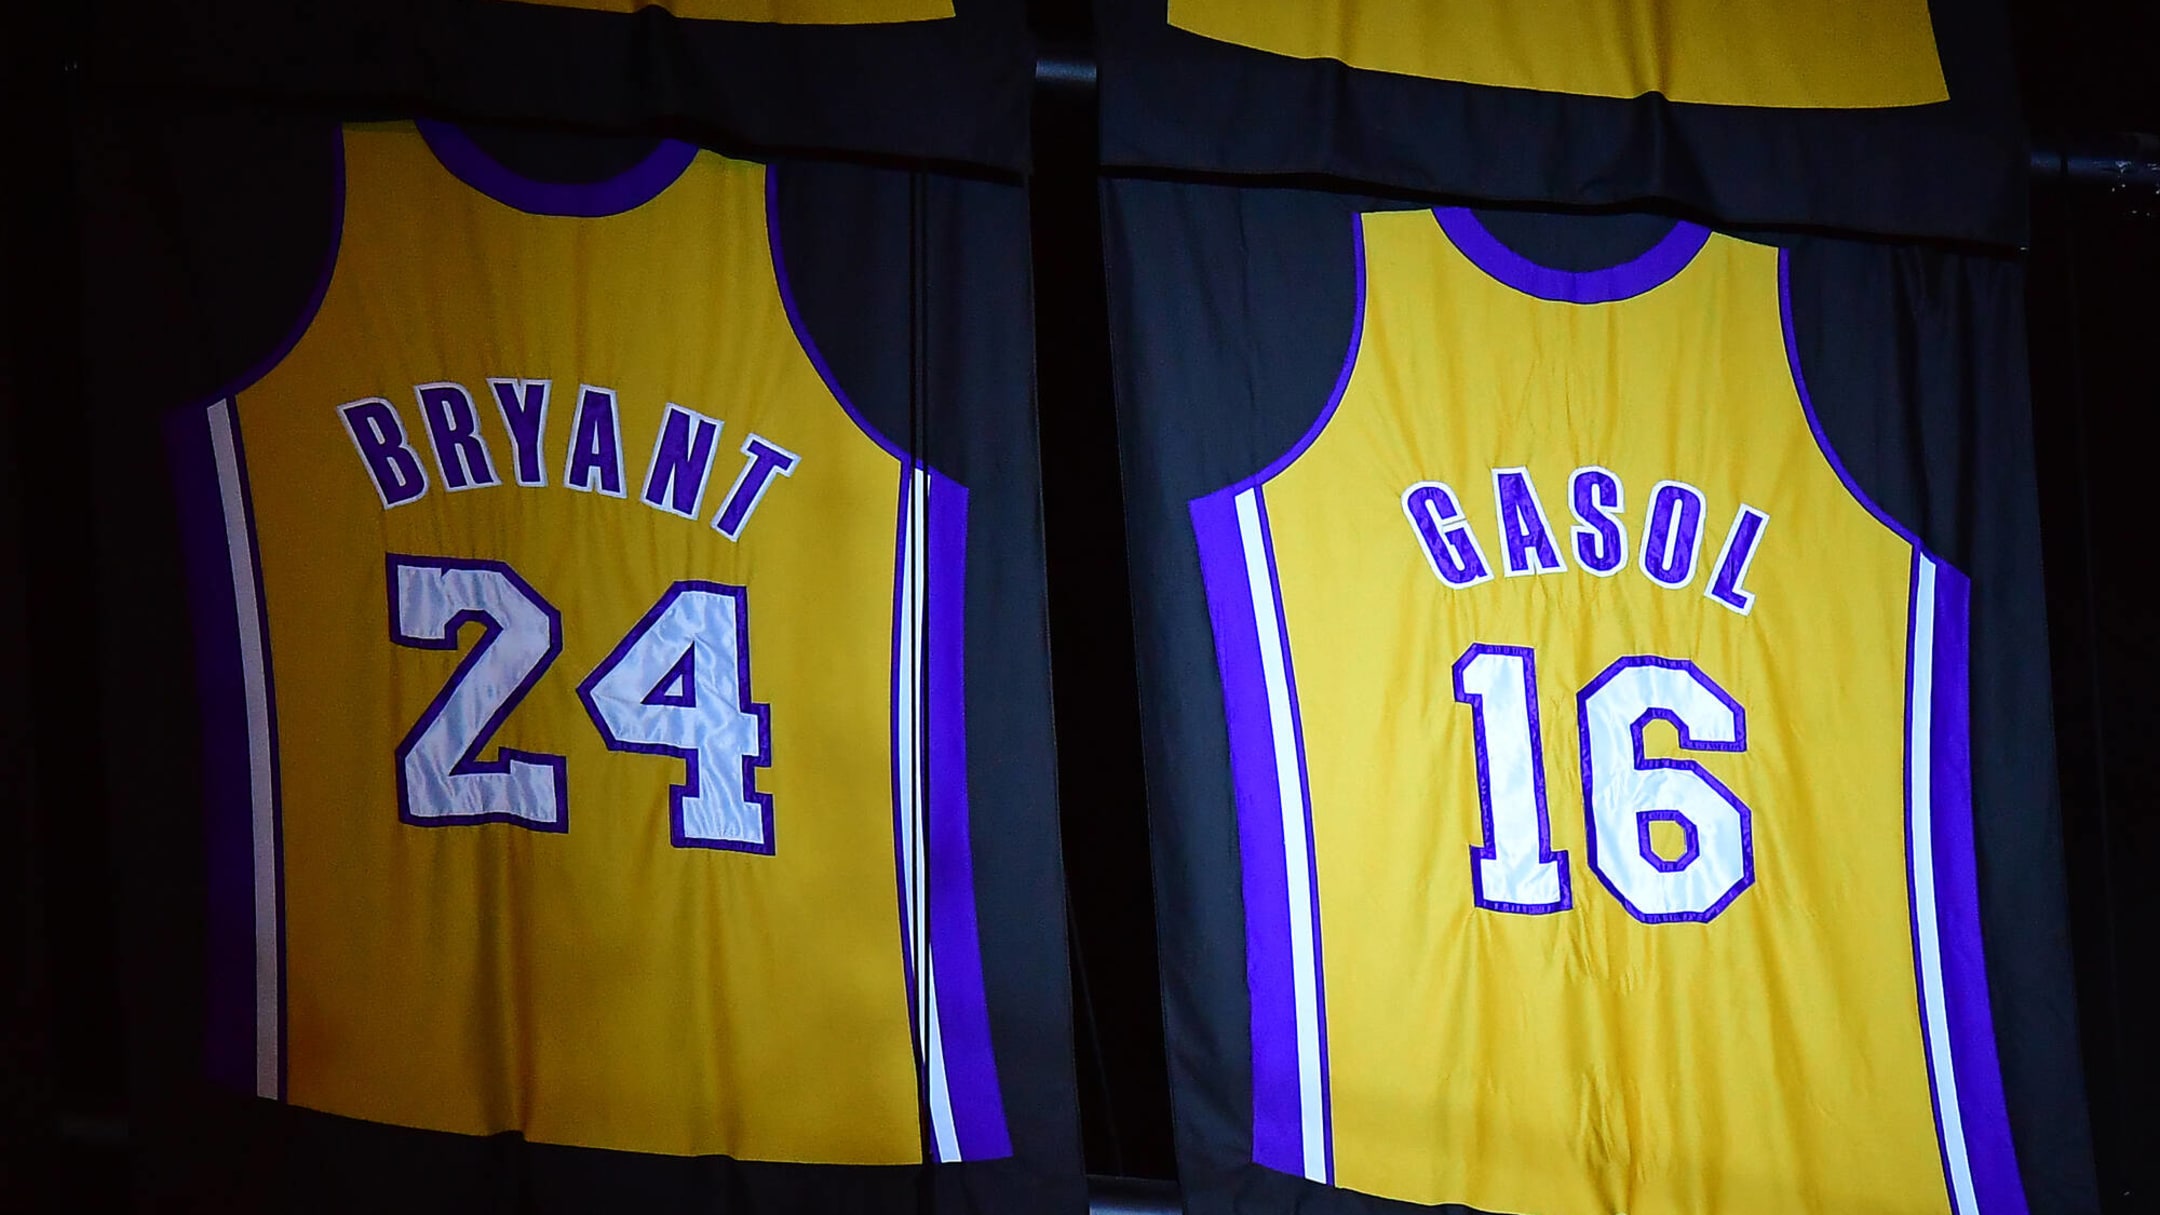 Lakers honor Kobe Bryant one more time at jersey retirement